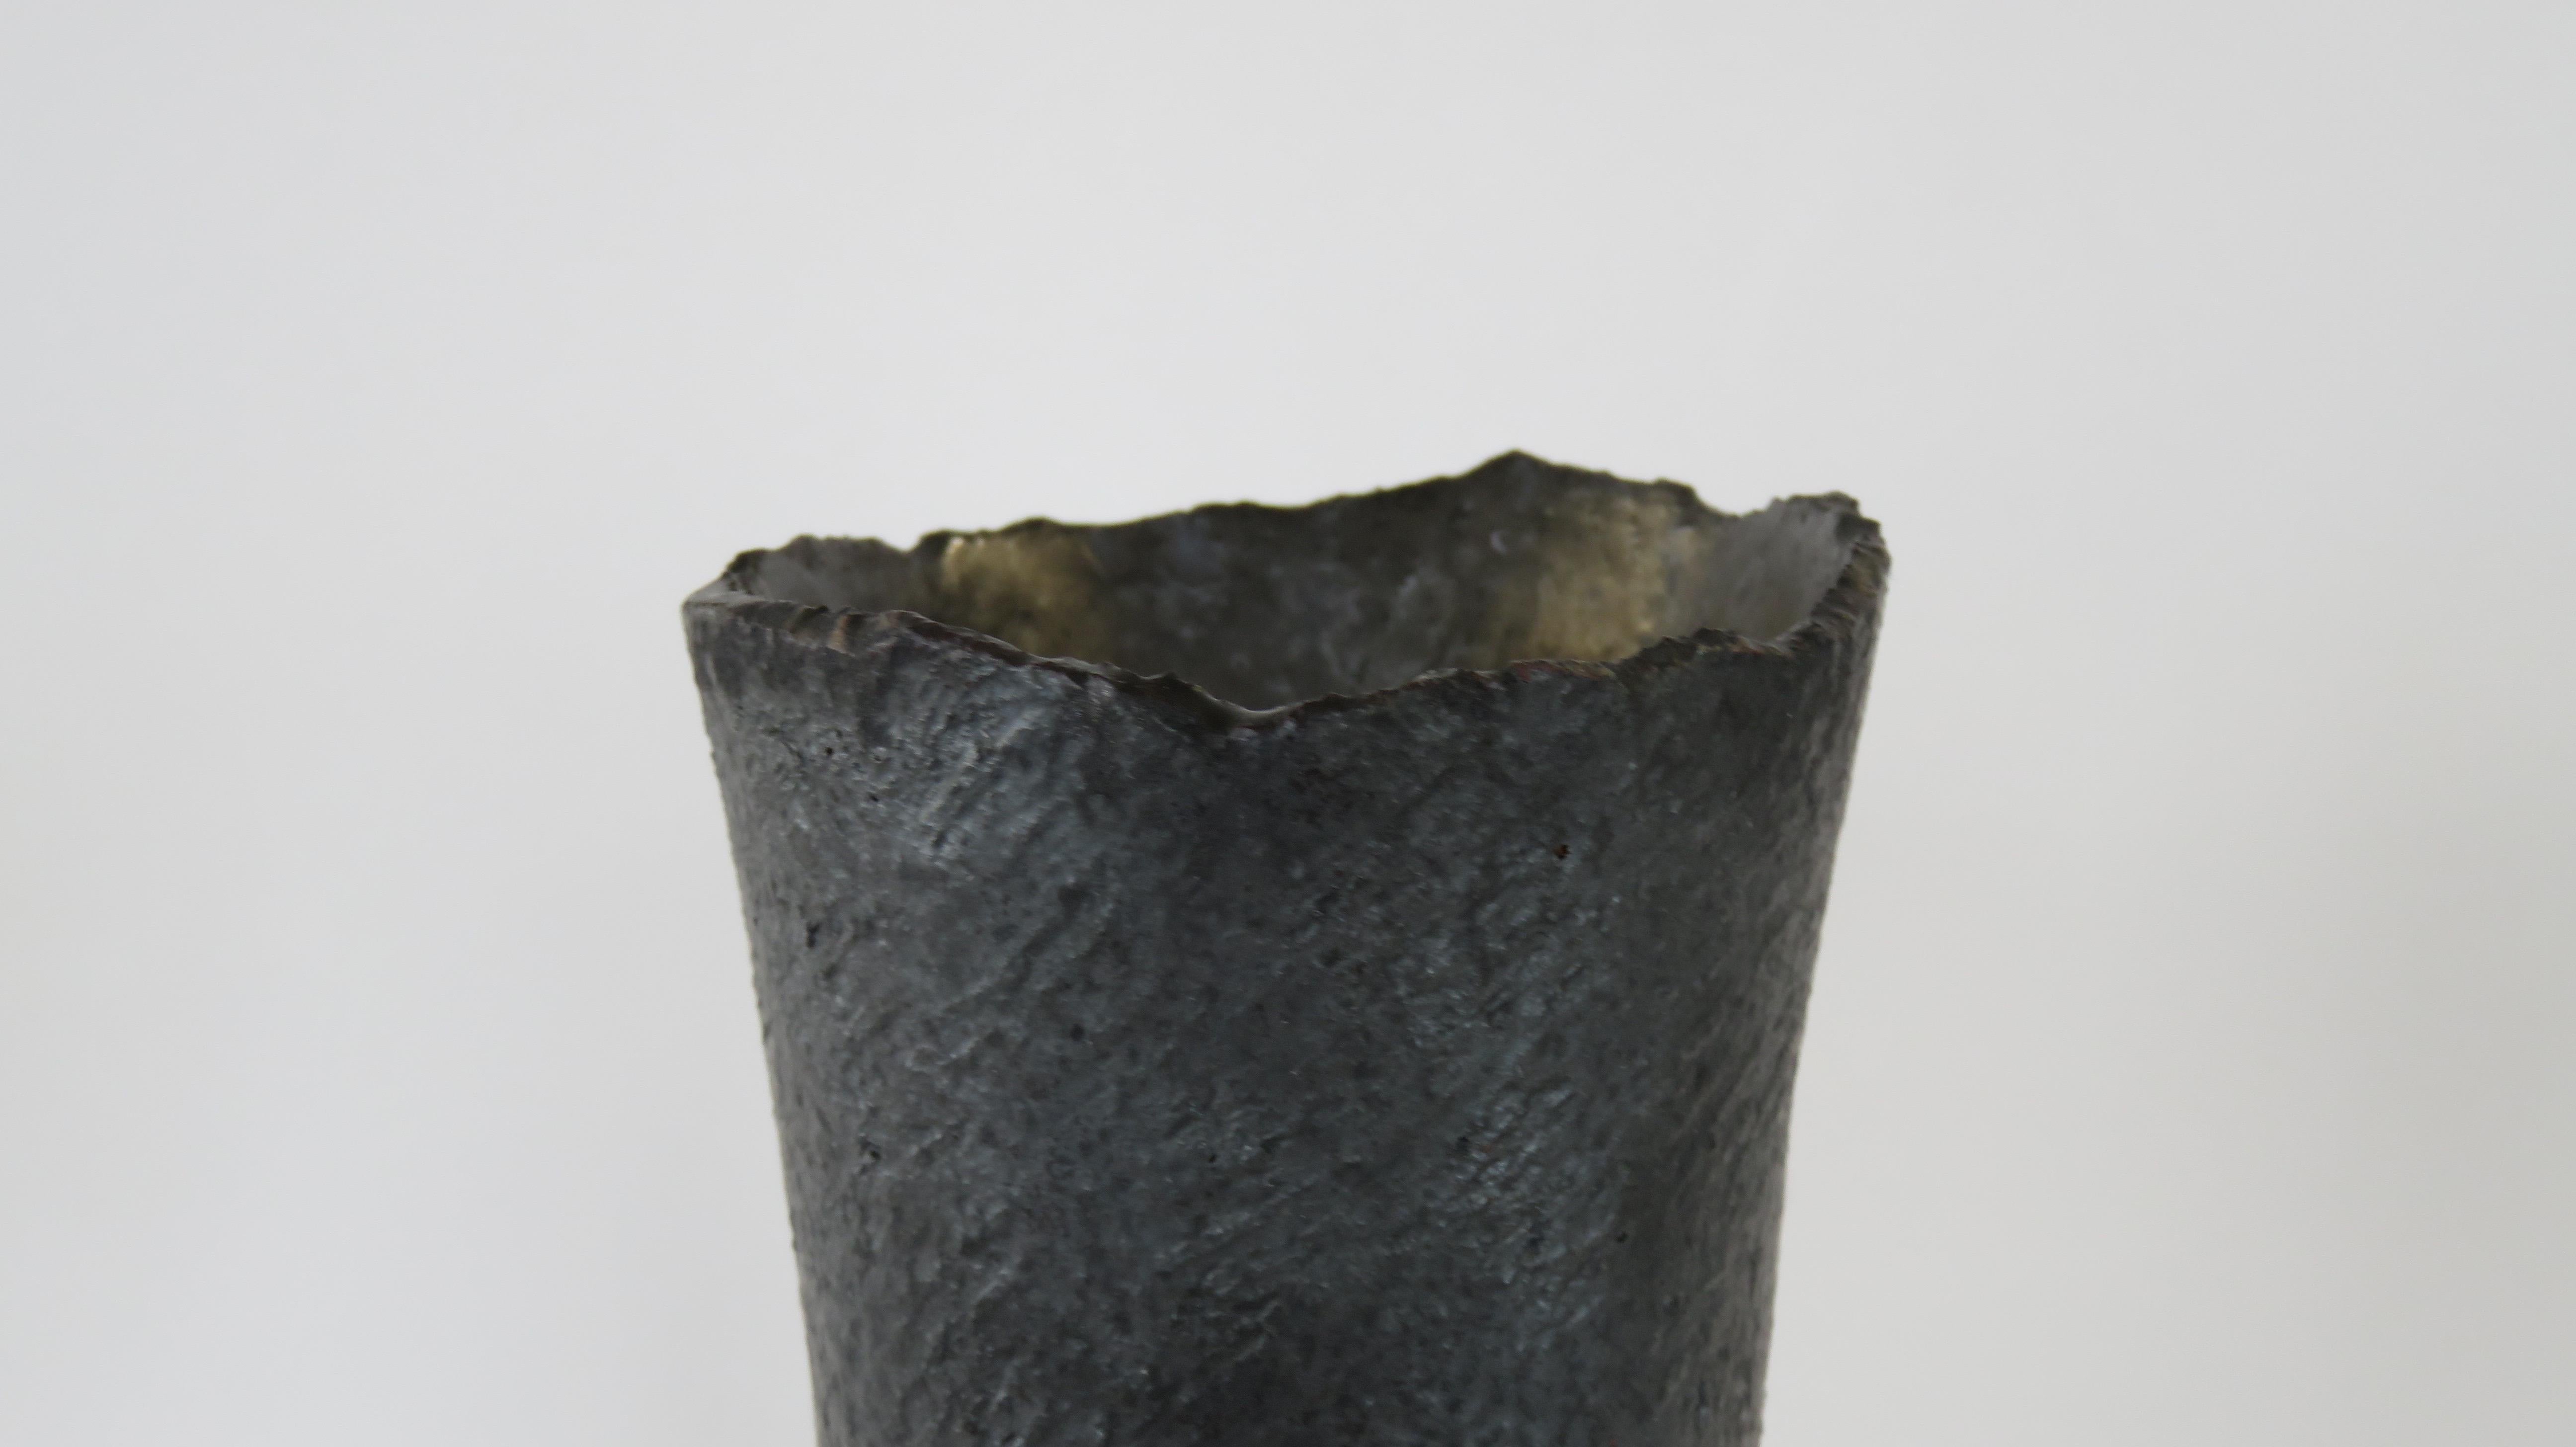 These tall ceramic vases in a metallic black glaze over stoneware are weighted on the bottom for tall floral arrangements or branches. Each surface is scraped to show the texture and tone of the clay, with varying bases or knobby edges. The top rims